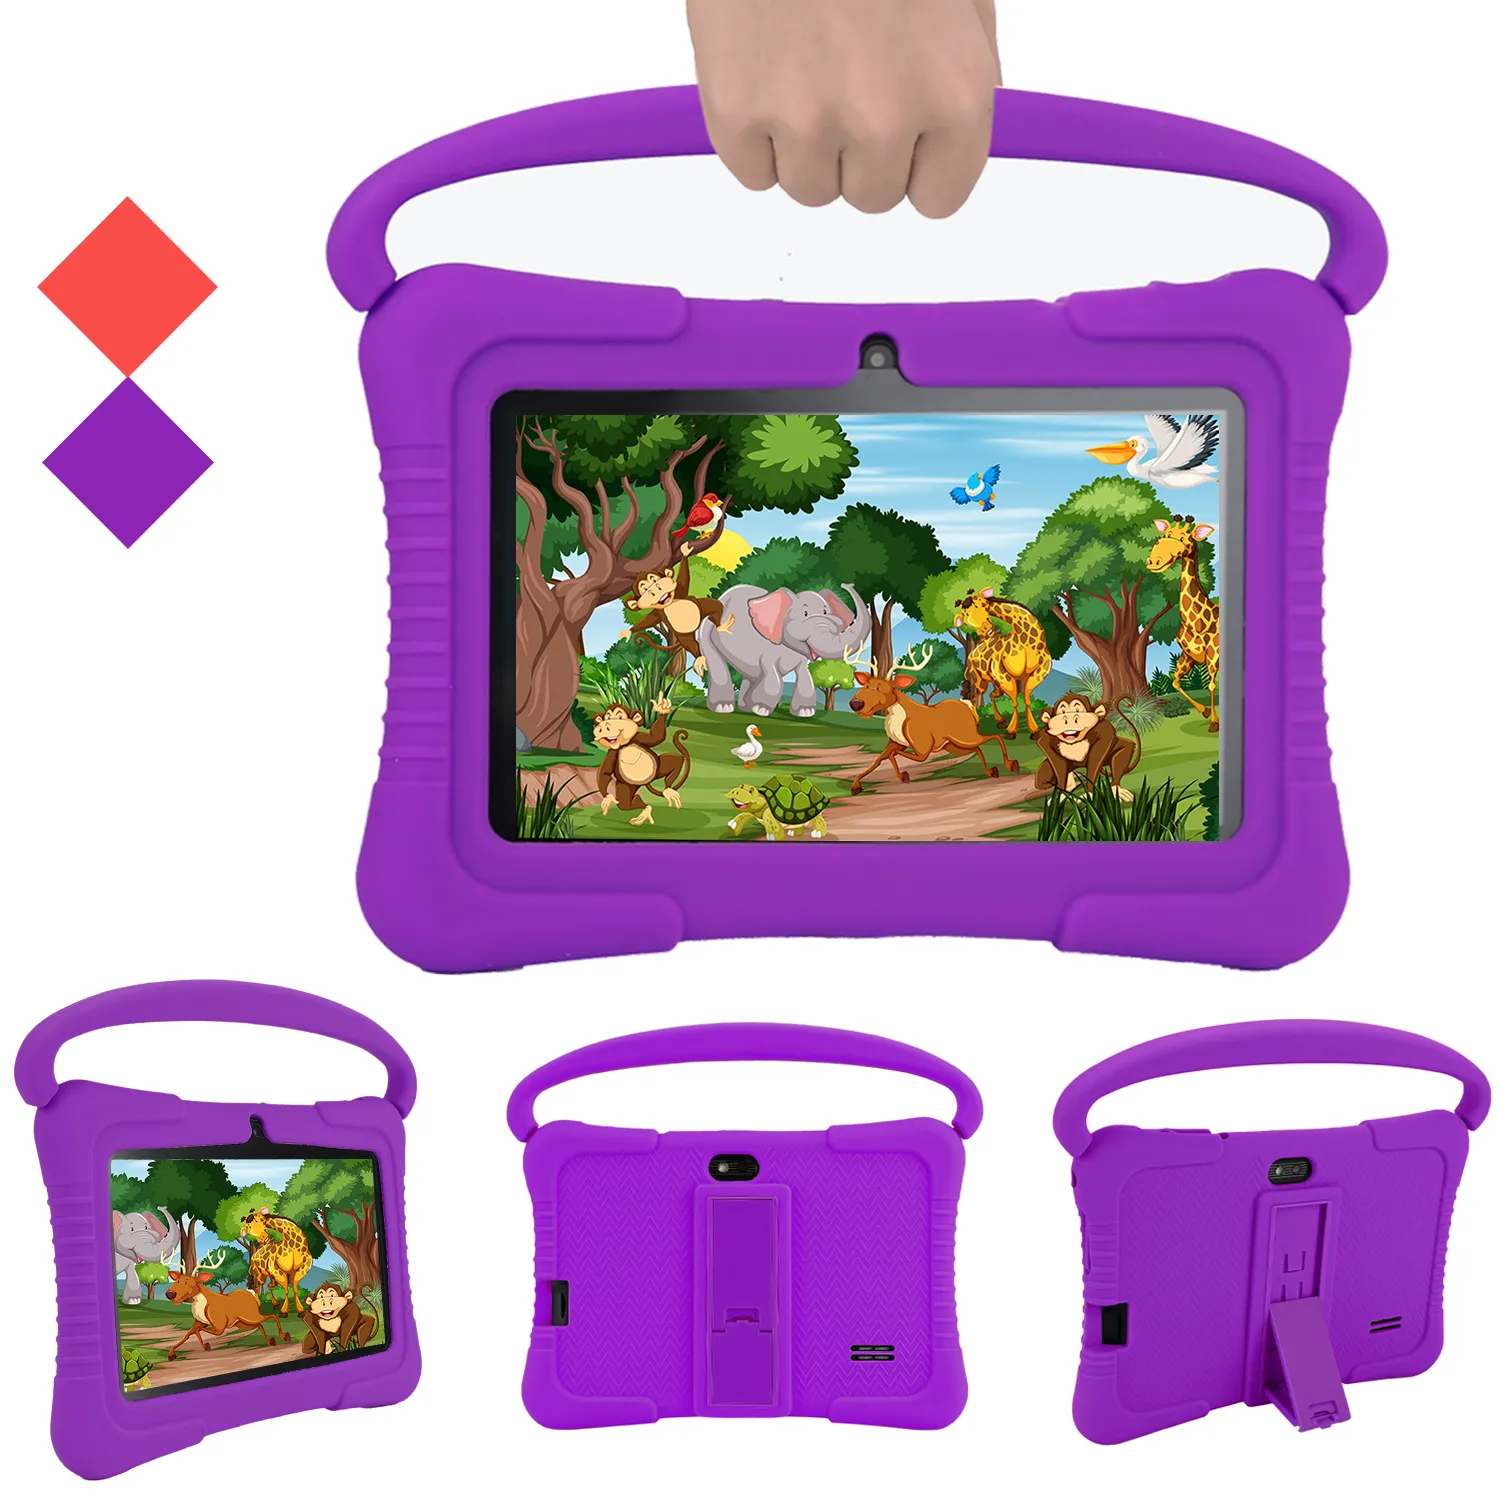 Top 10 Low Cost Android Tablets 7 Inch Learning Software Tablet For Kids WiFi Education Tablet Pc